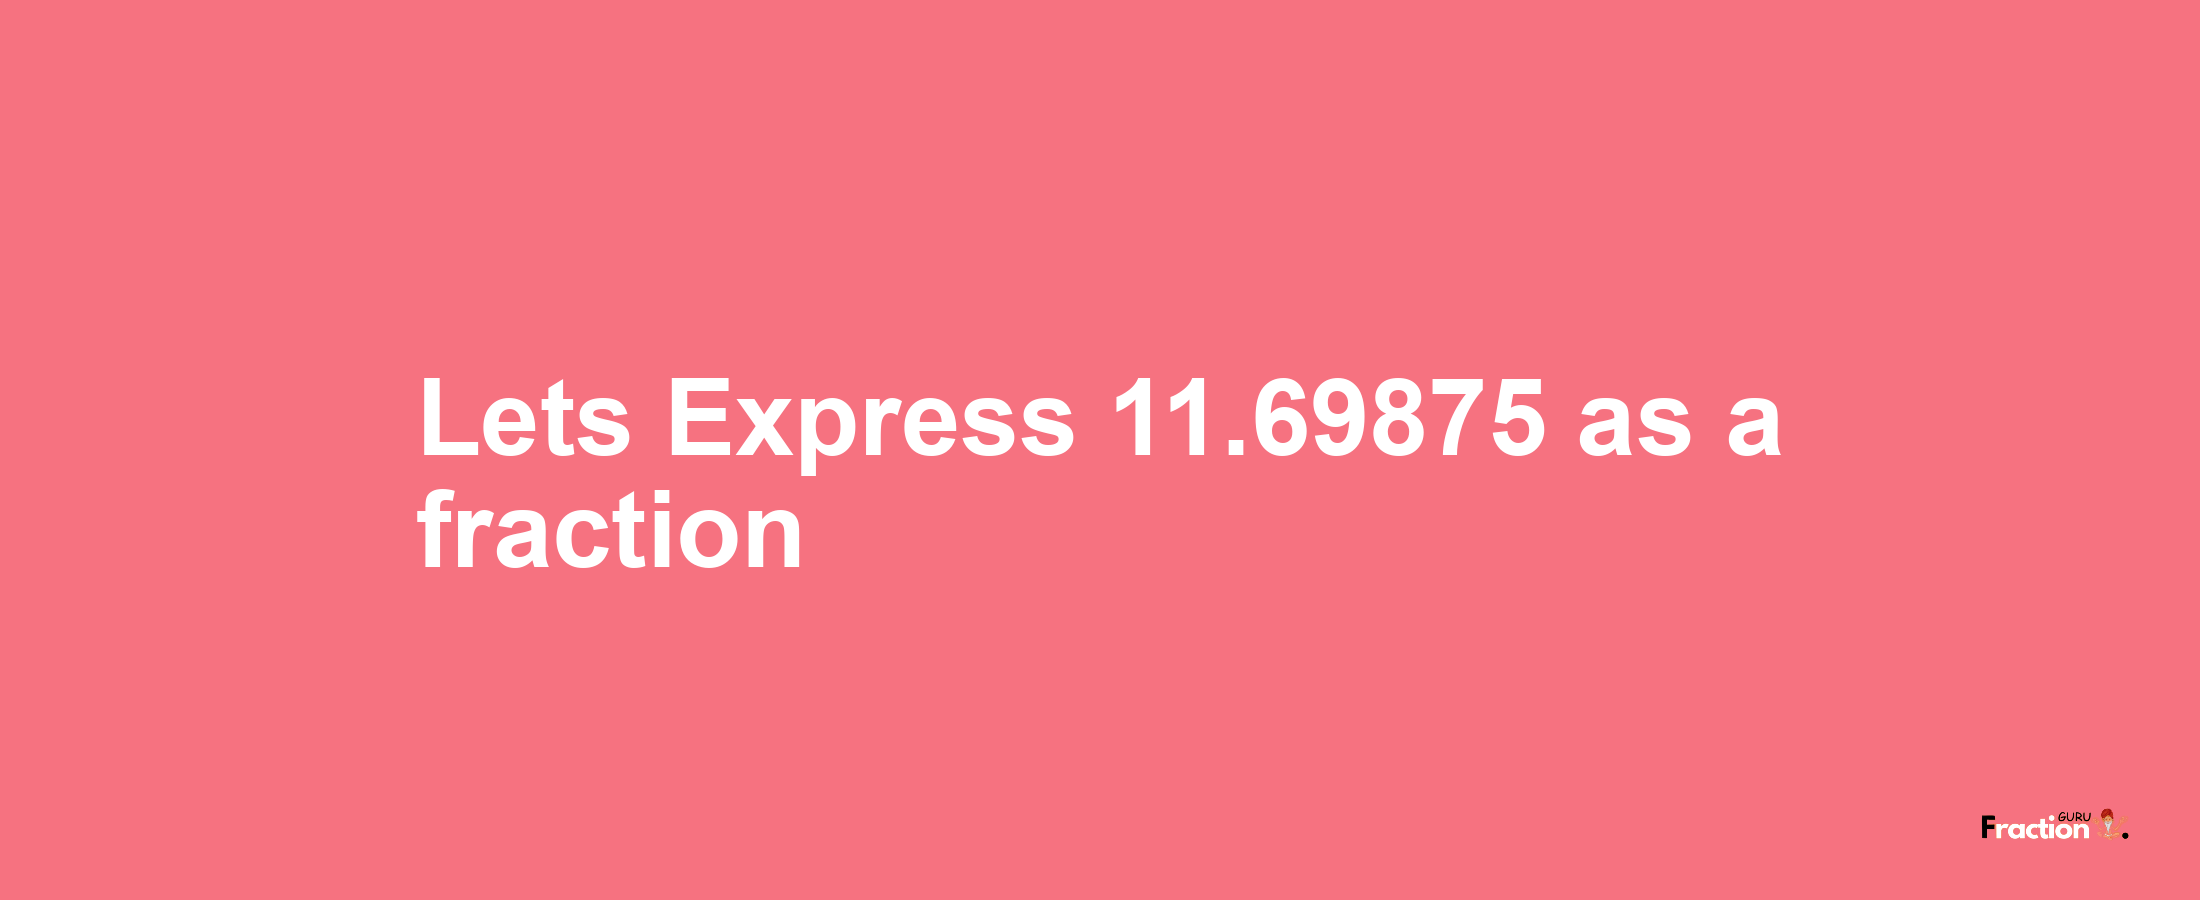 Lets Express 11.69875 as afraction